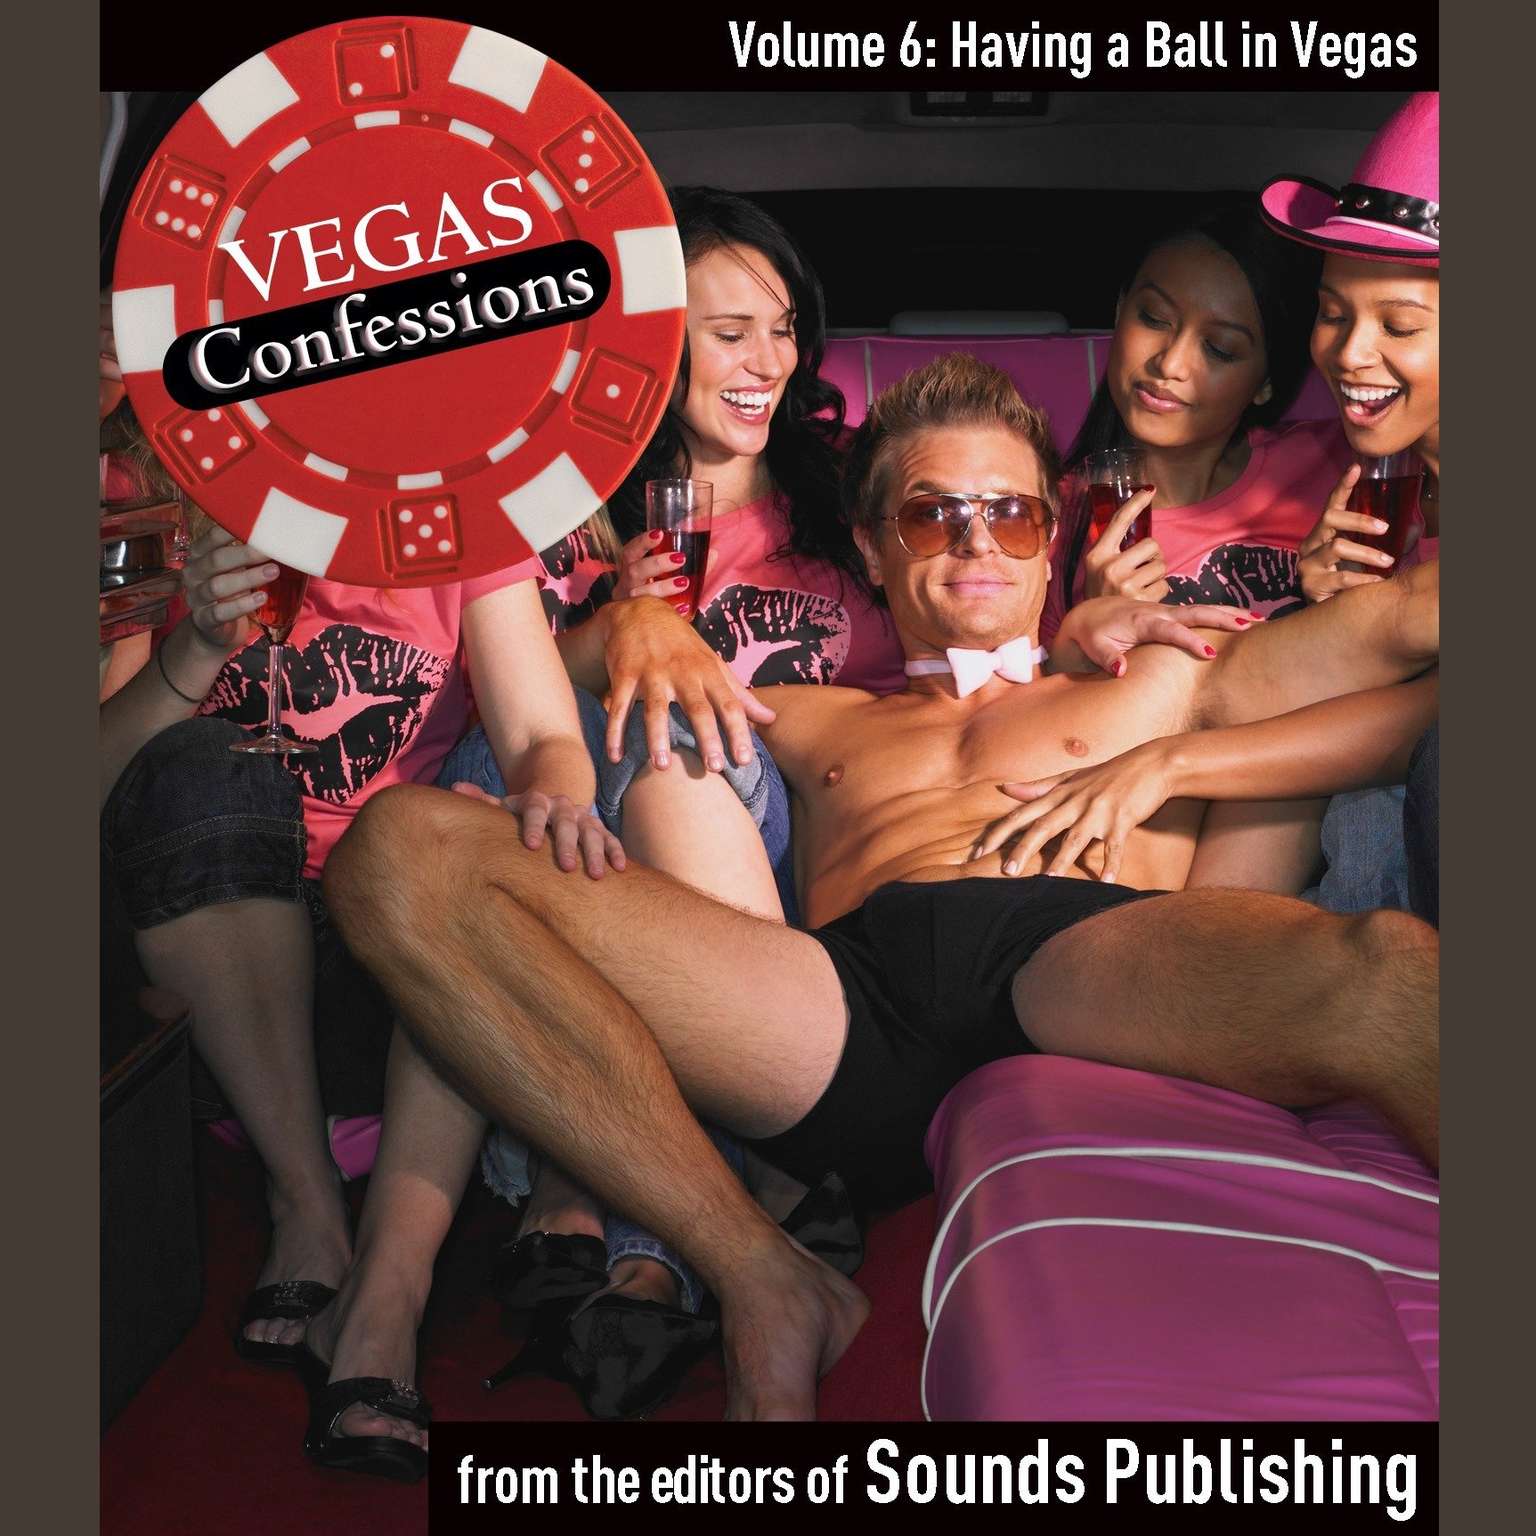 Vegas Confessions 6: Having a Ball in Vegas Audiobook, by The Editors of Sounds Publishing